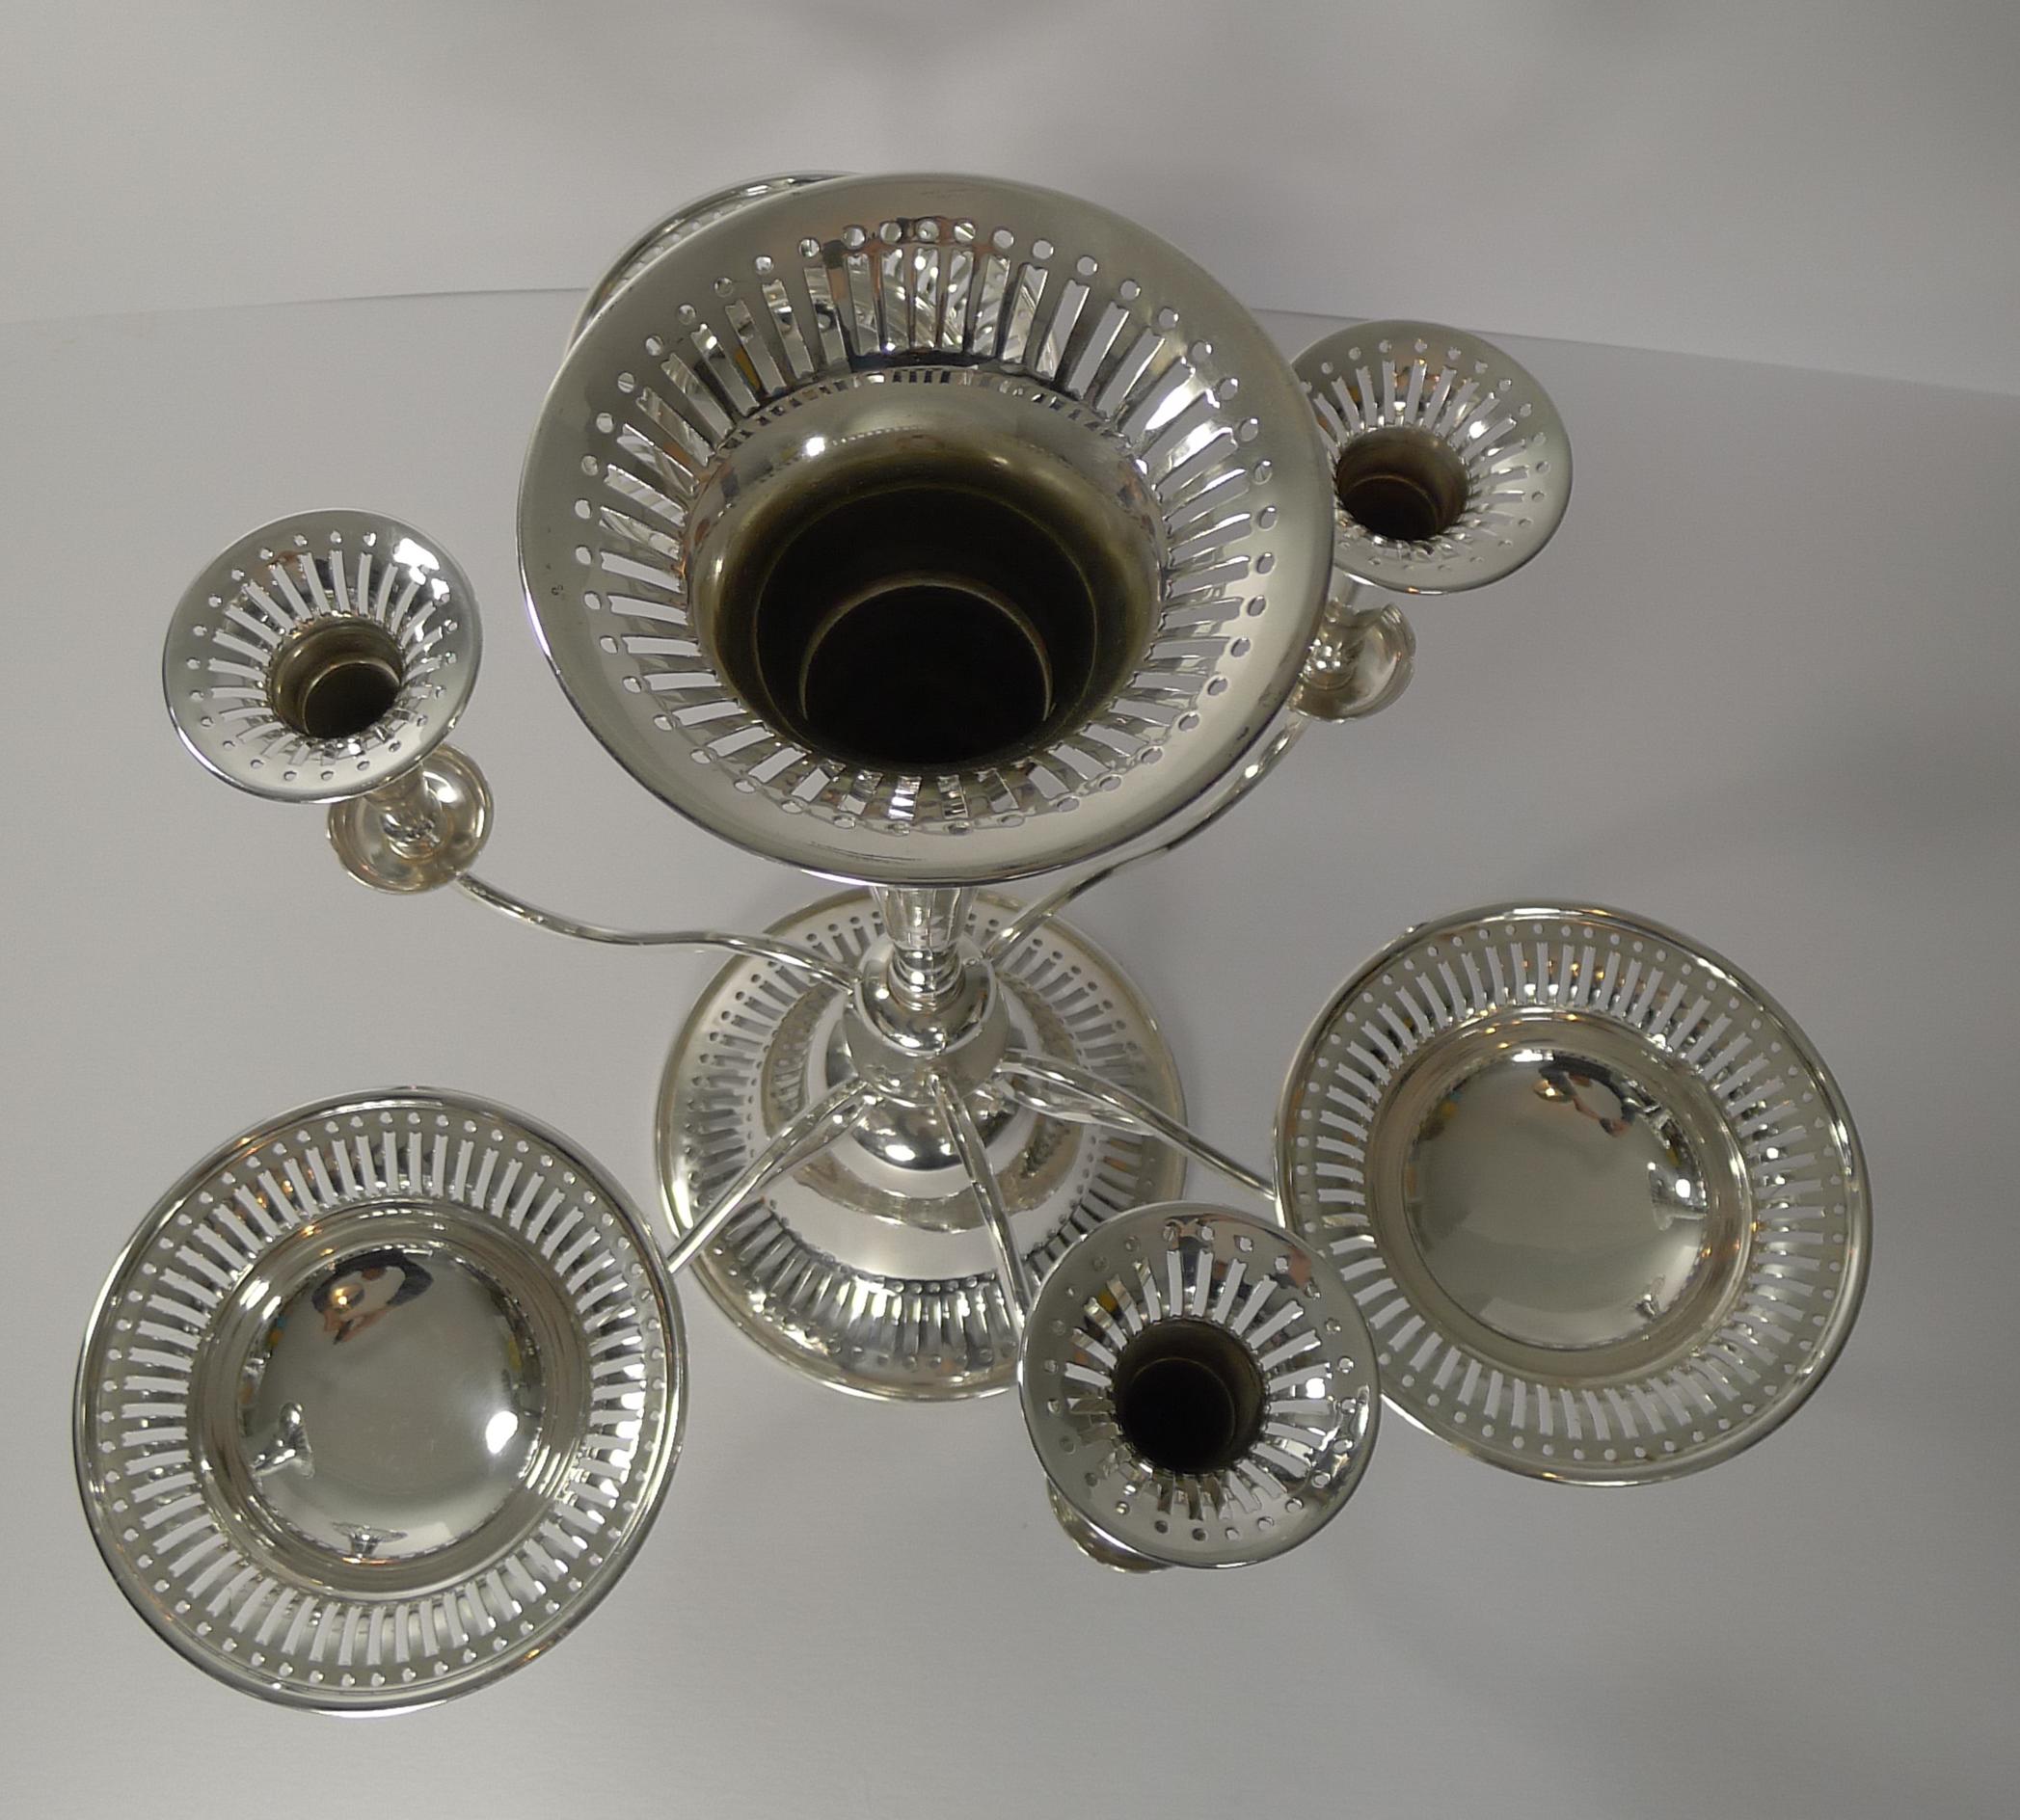 Early 20th Century Large Antique English Silver Plated Centerpiece, circa 1910